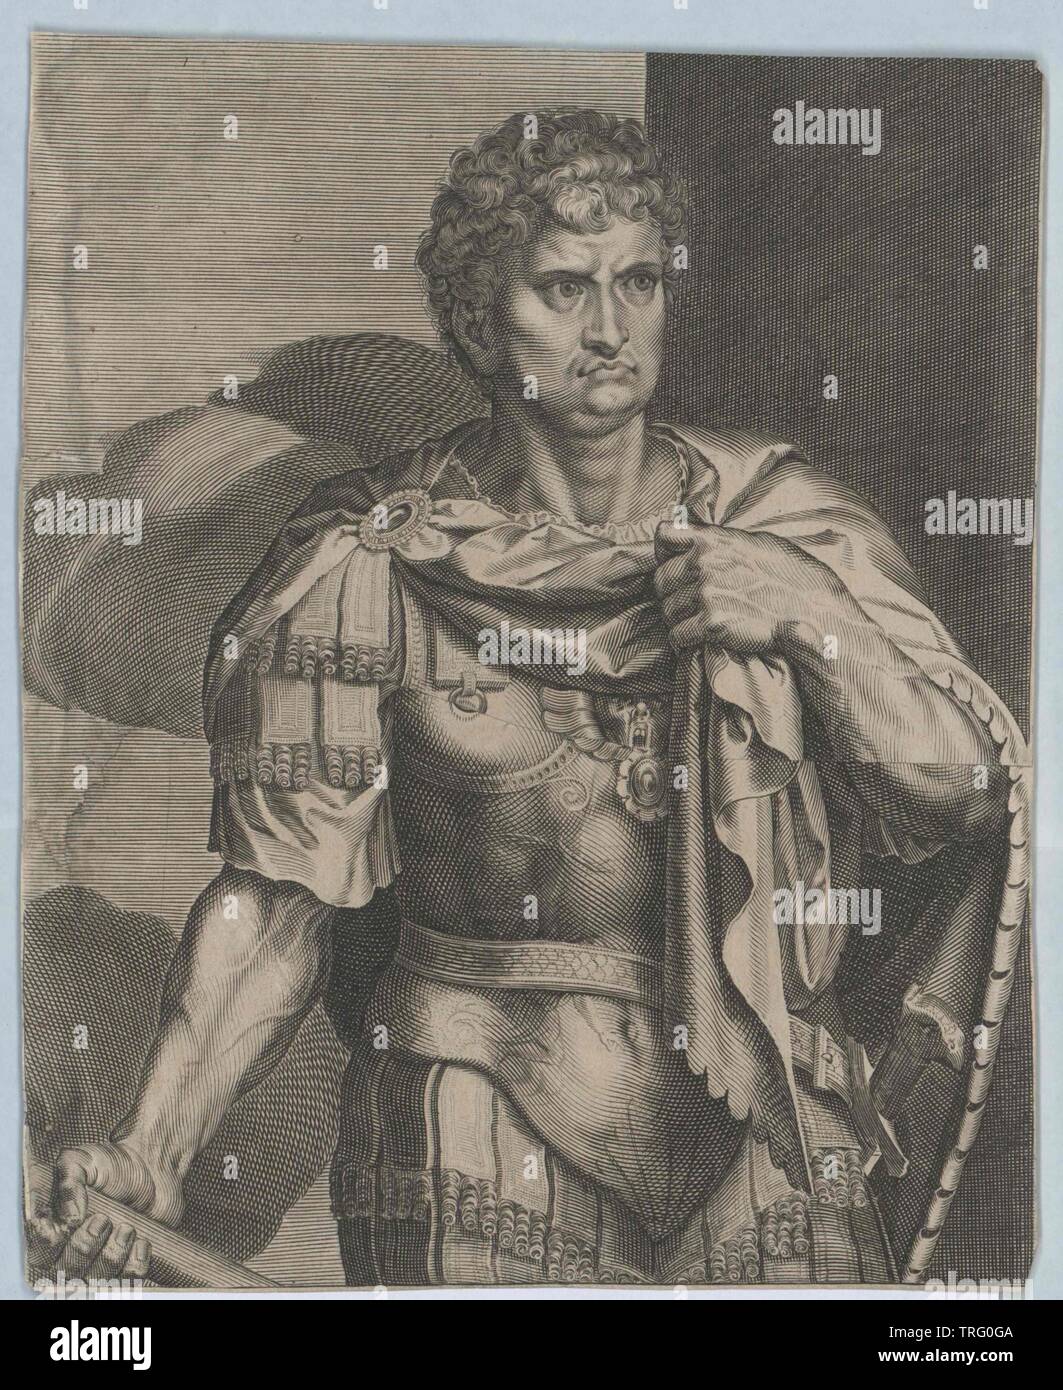 Nero, imperatore romano, Additional-Rights-Clearance-Info-Not-Available Foto Stock